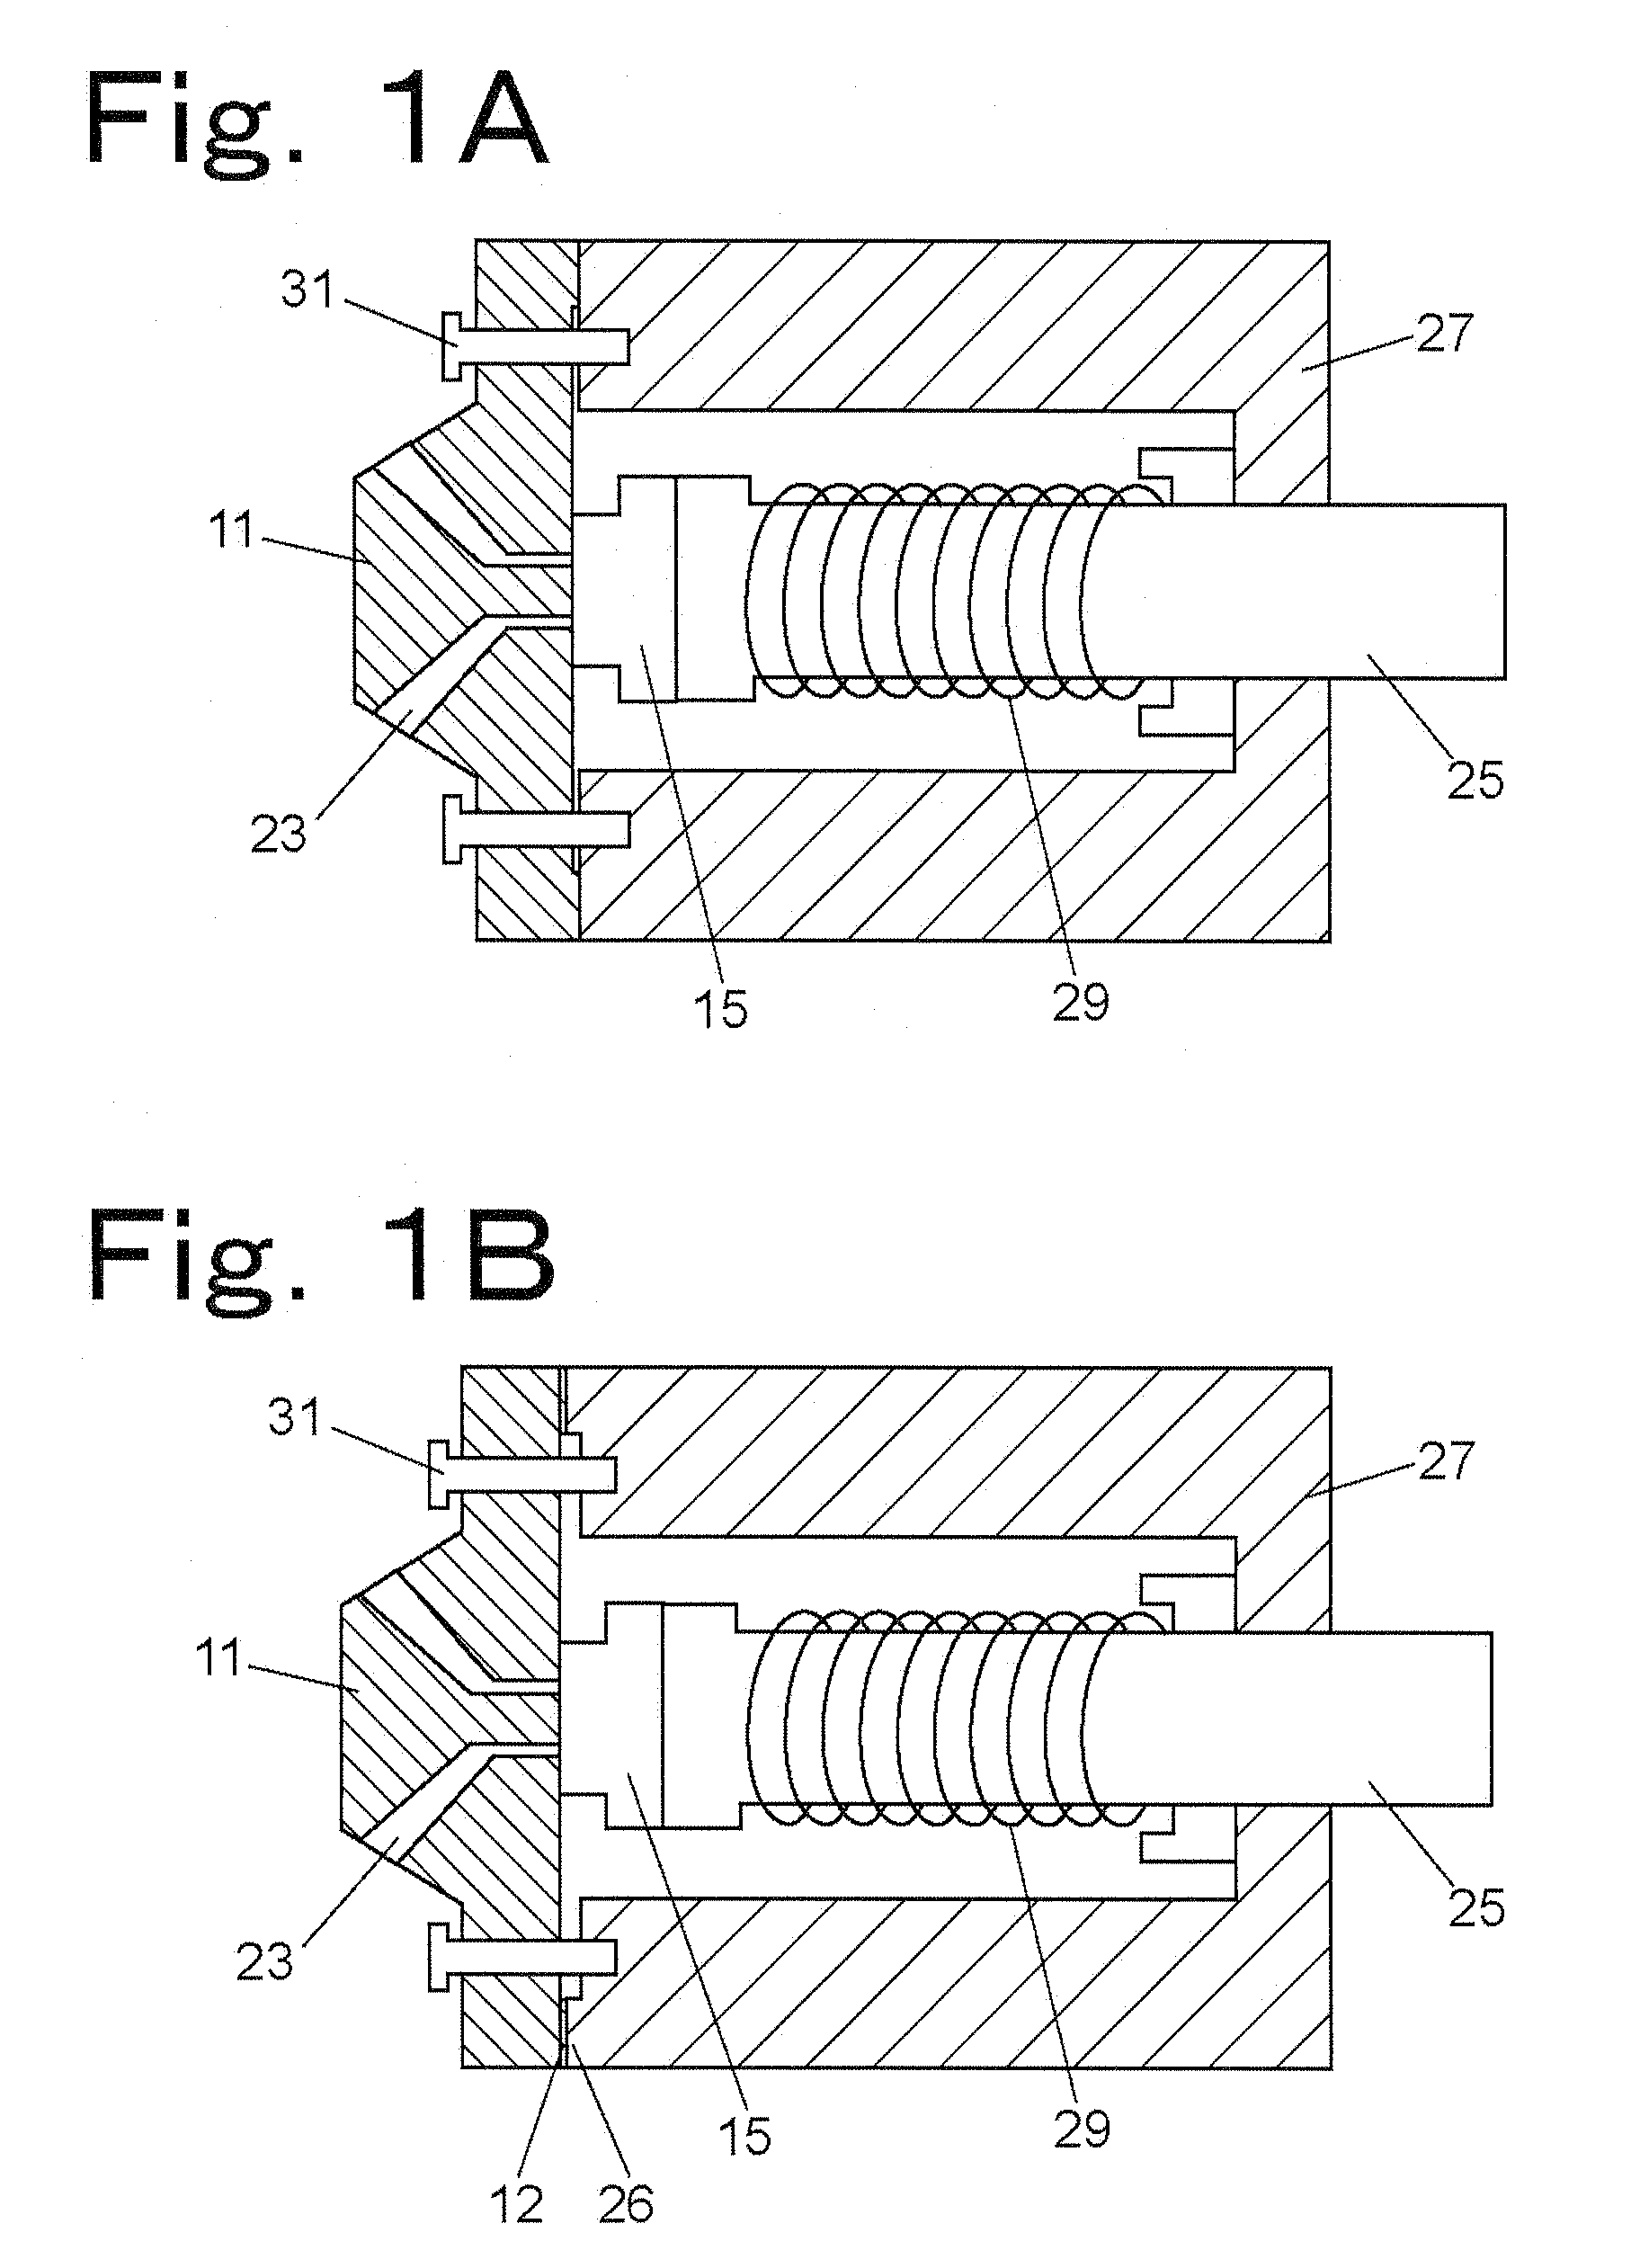 Channel switching valve